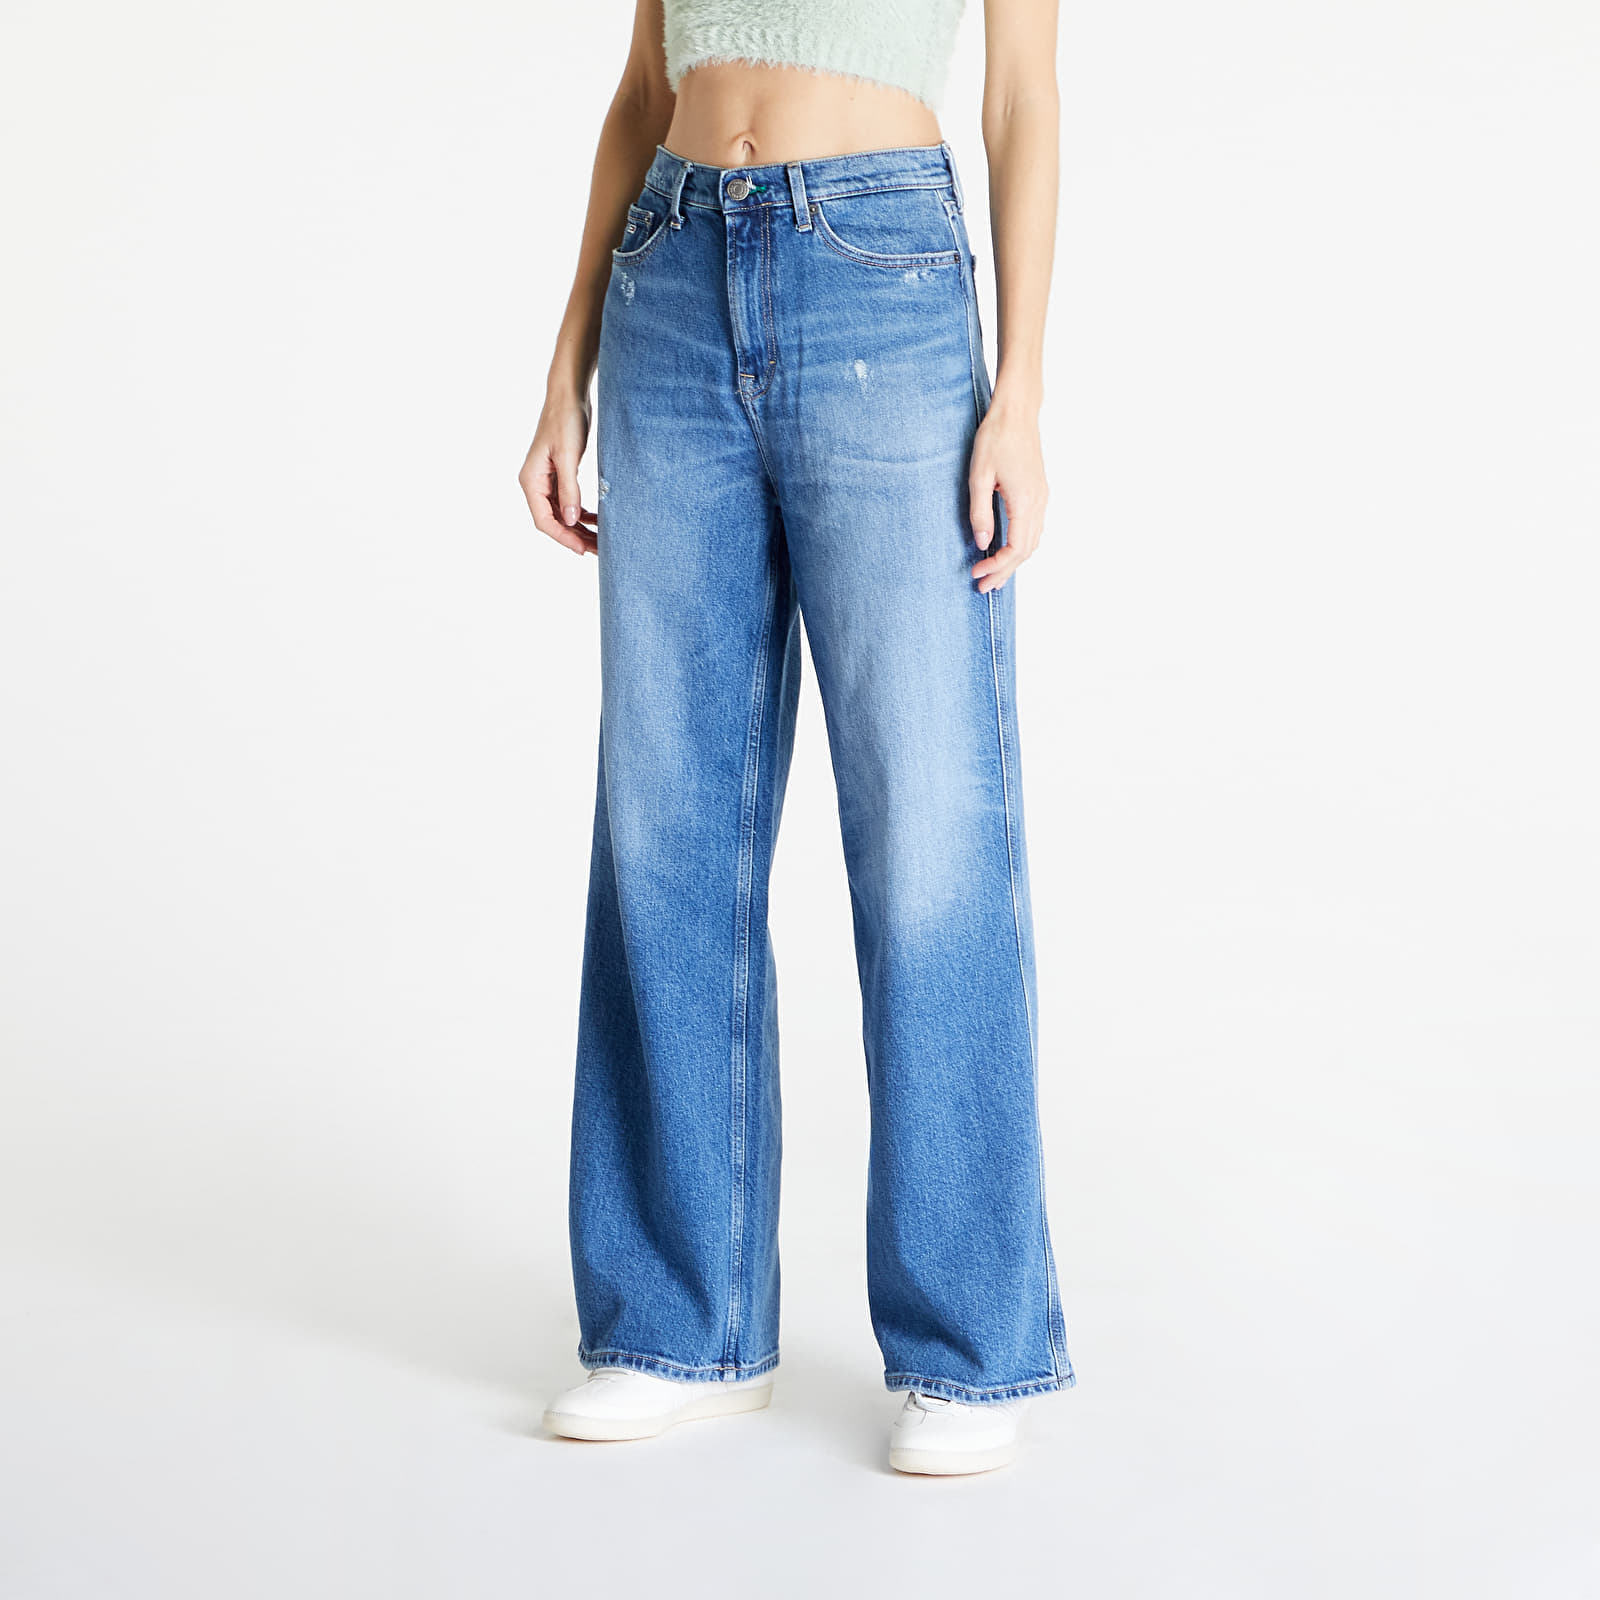 Tommy Hilfiger - Tommy Jeans Claire High Wide Jeans Denim Medium